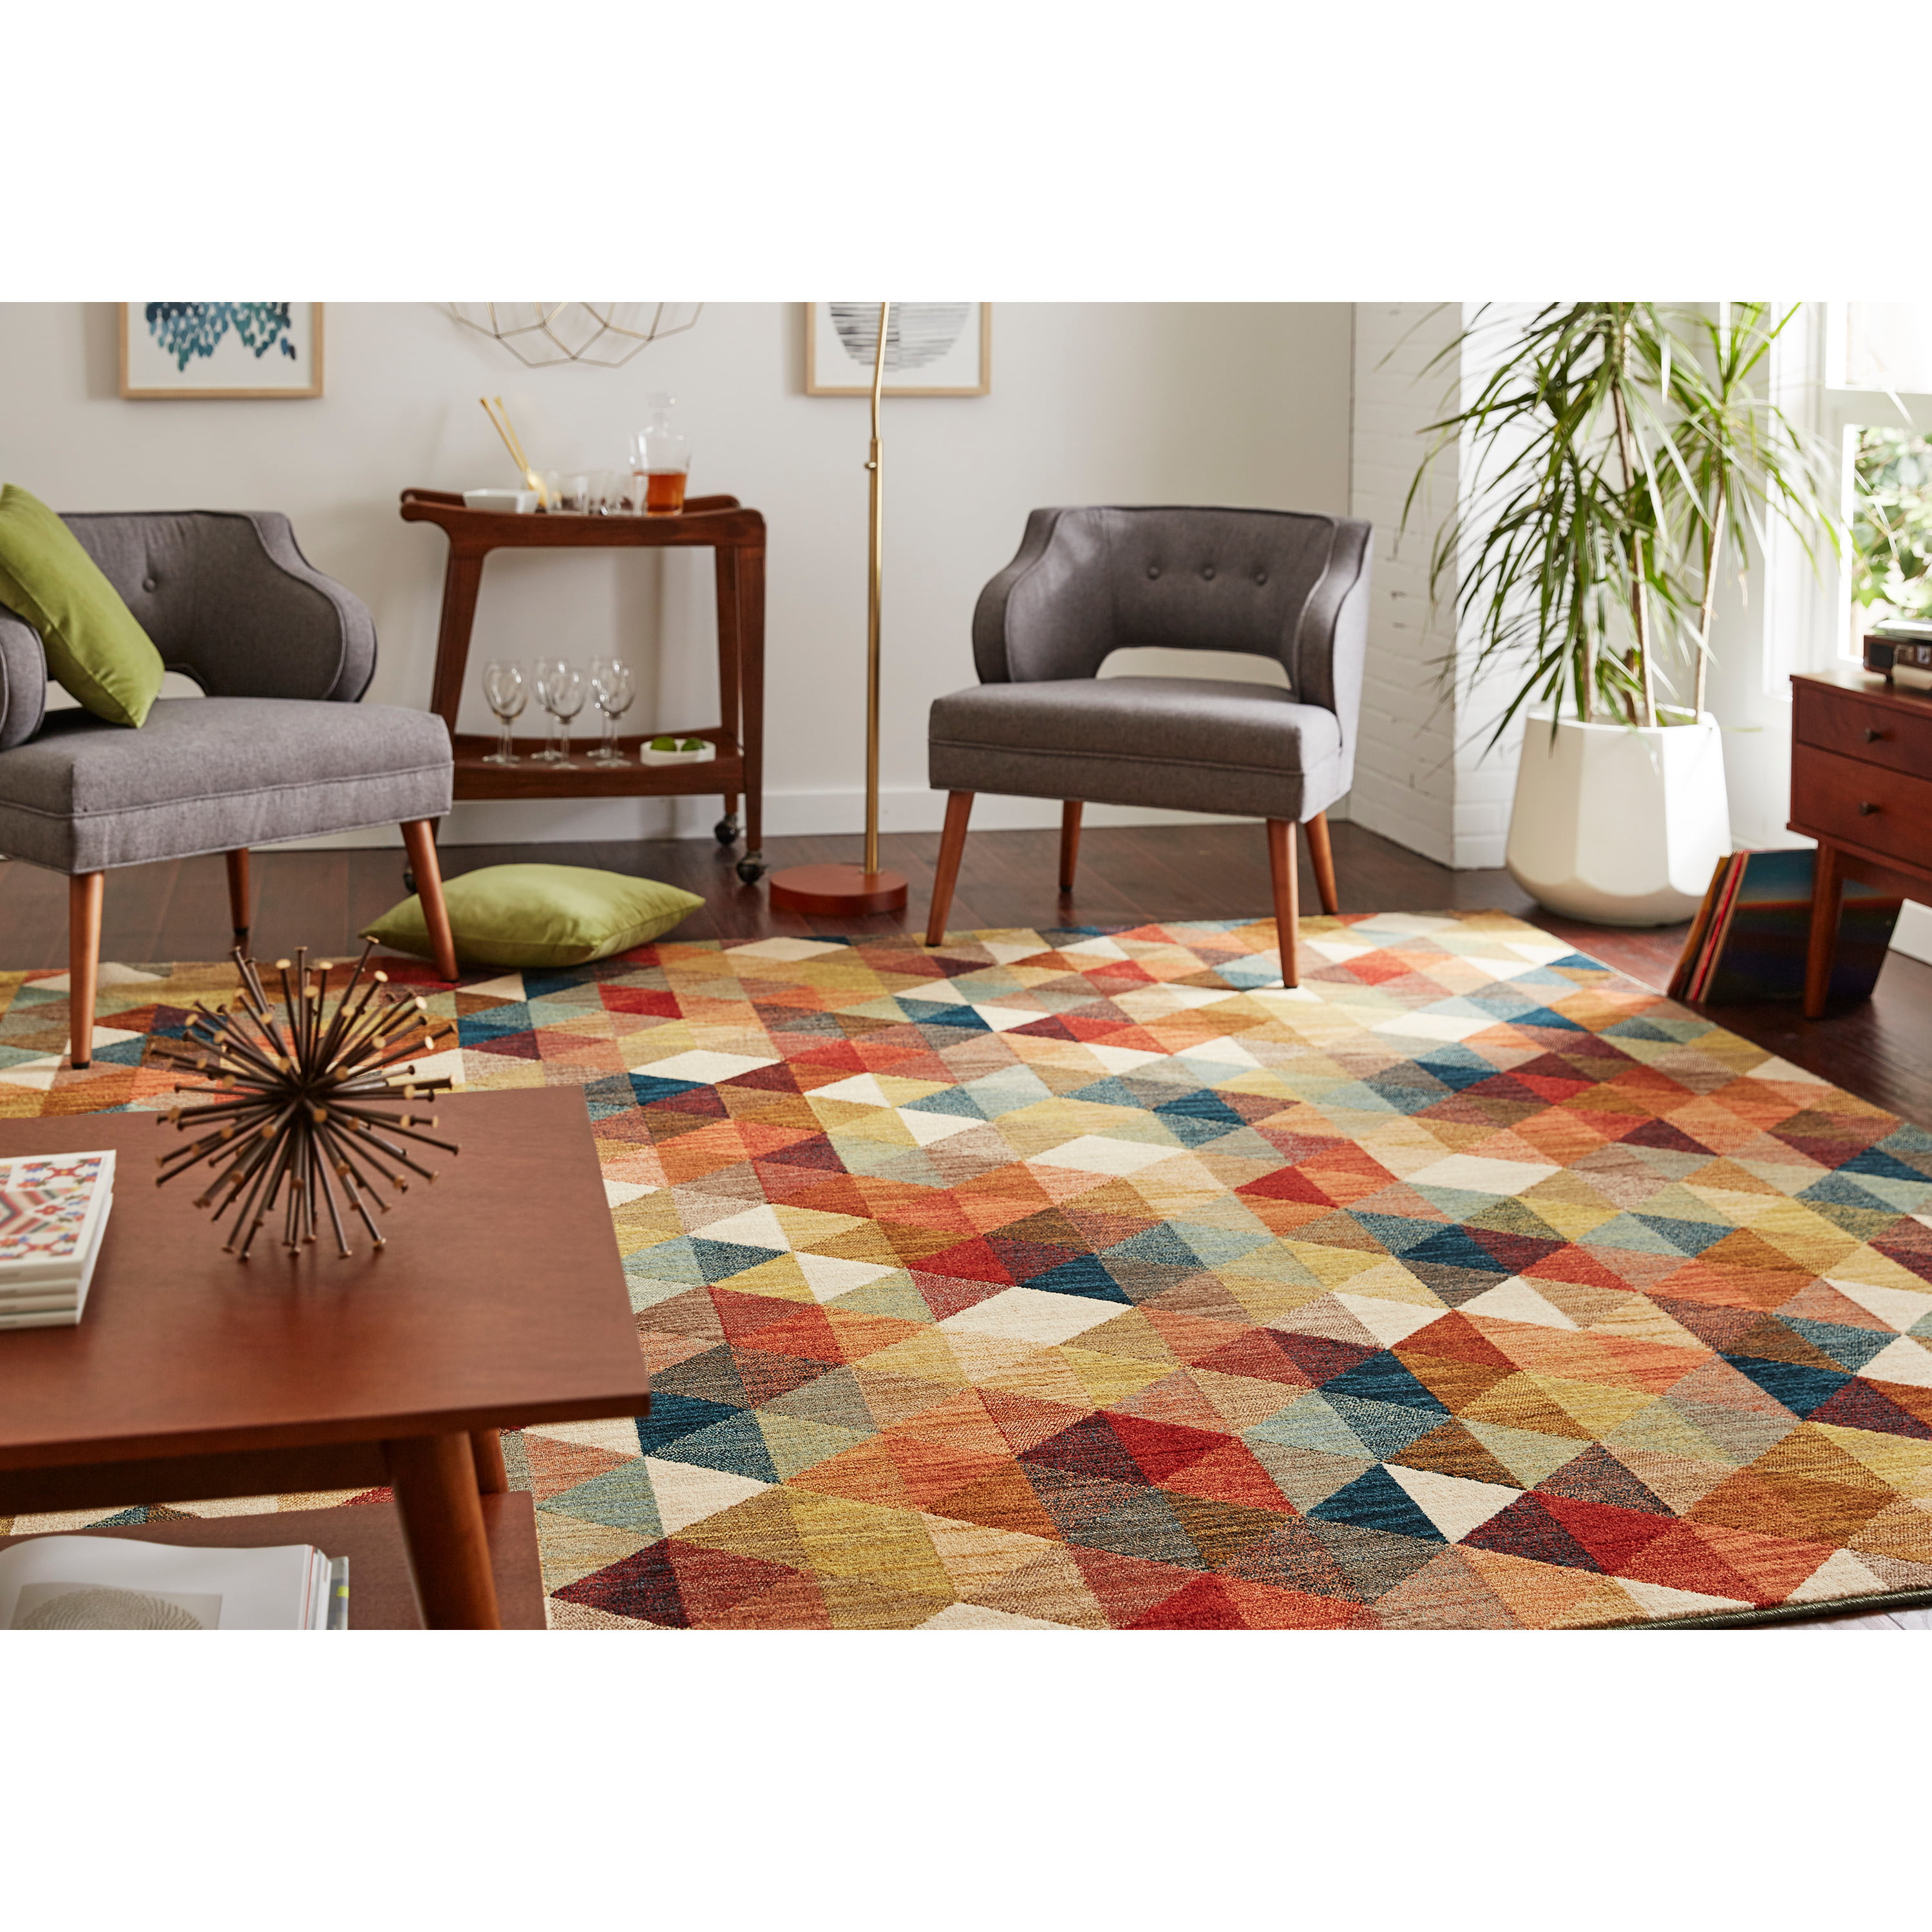 Mohawk Home Studio Diamonte Multi Woven, Teal And Red Rug